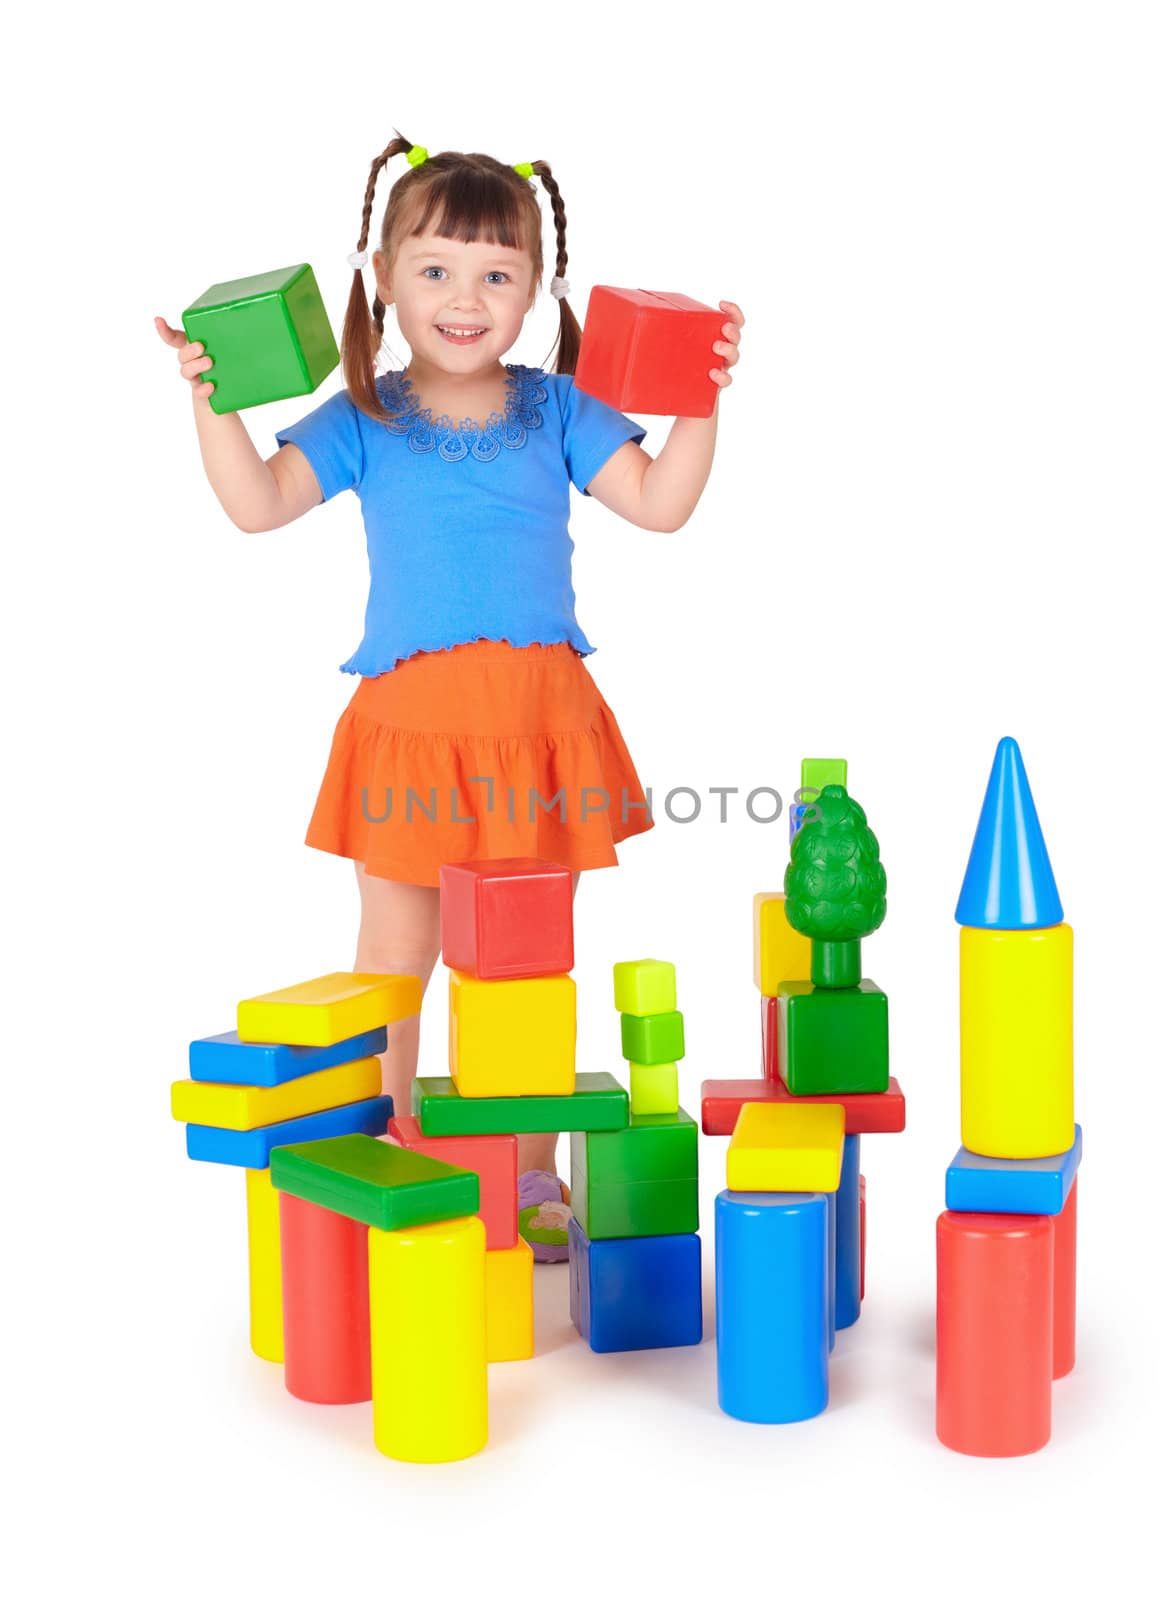 Little girl is playing with colored blocks by pzaxe